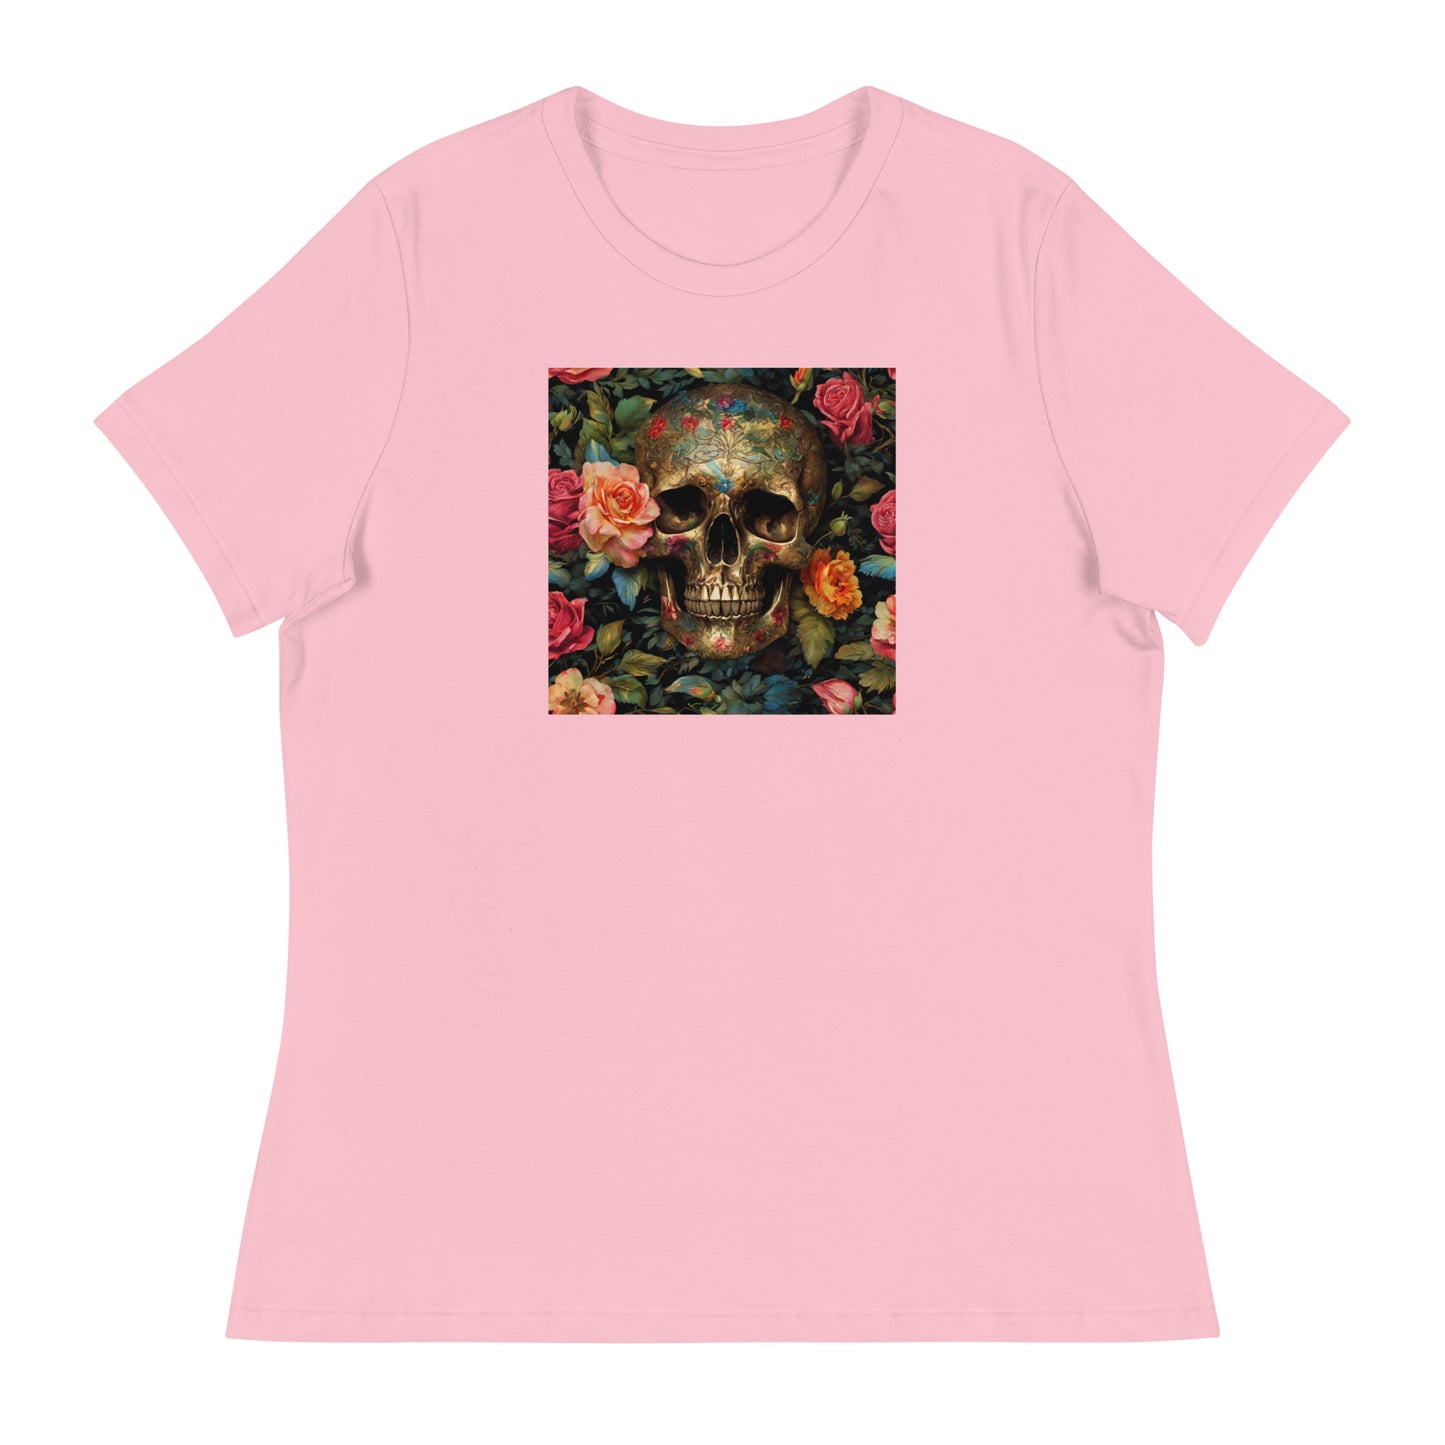 Skull and Roses Graphic Women's T-Shirt Pink